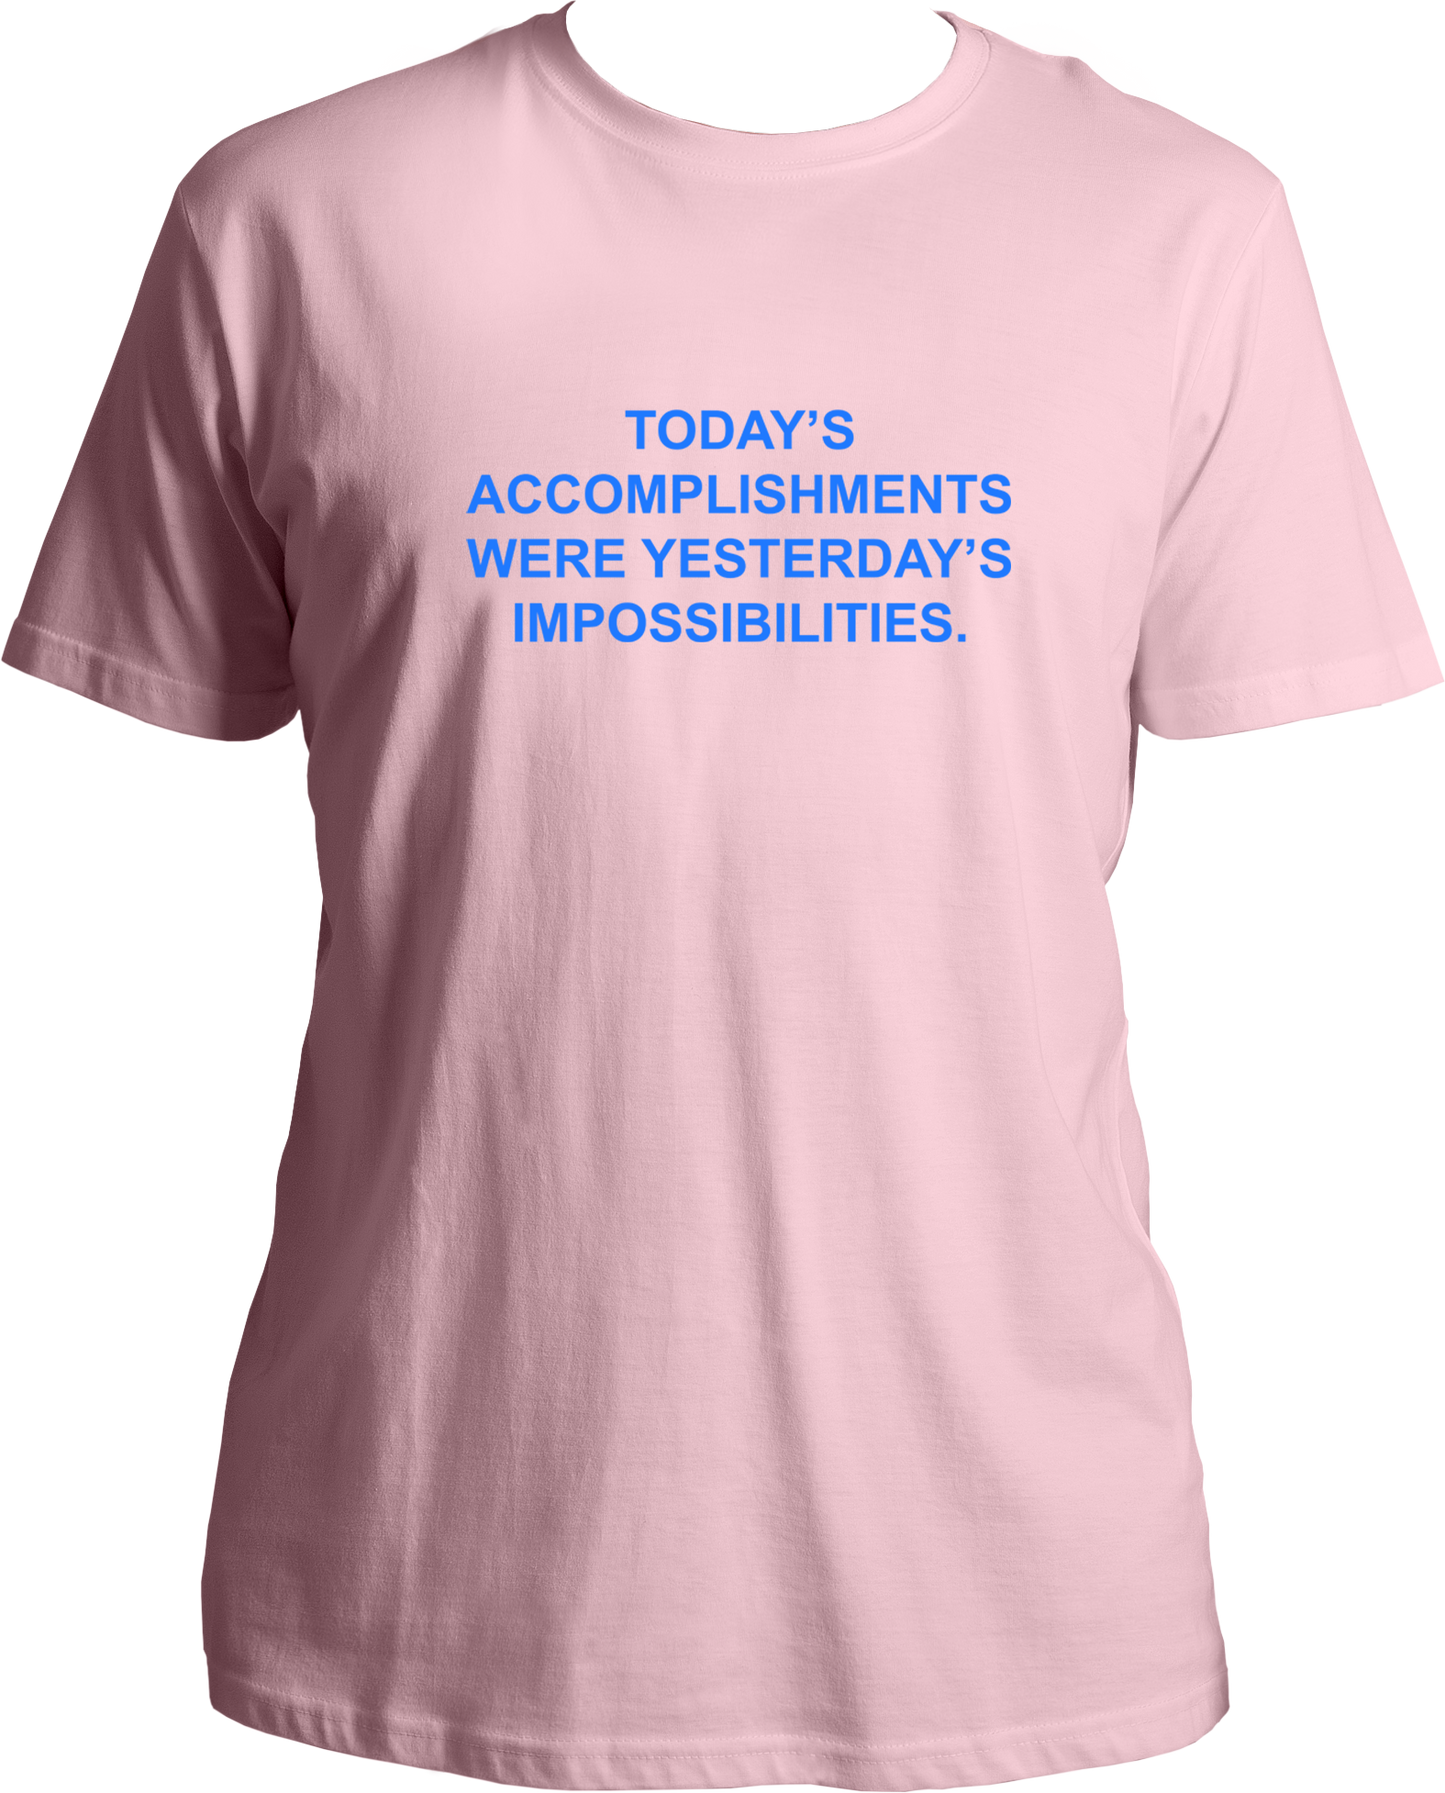 This unisex T-shirt from Garrari celebrates the power of possibility, with an English quote that serves as an inspirational reminder of how far you can go. Crafted from quality cotton fabric, the shirt has a comfortable fit that you can easily incorporate into your everyday wardrobe.